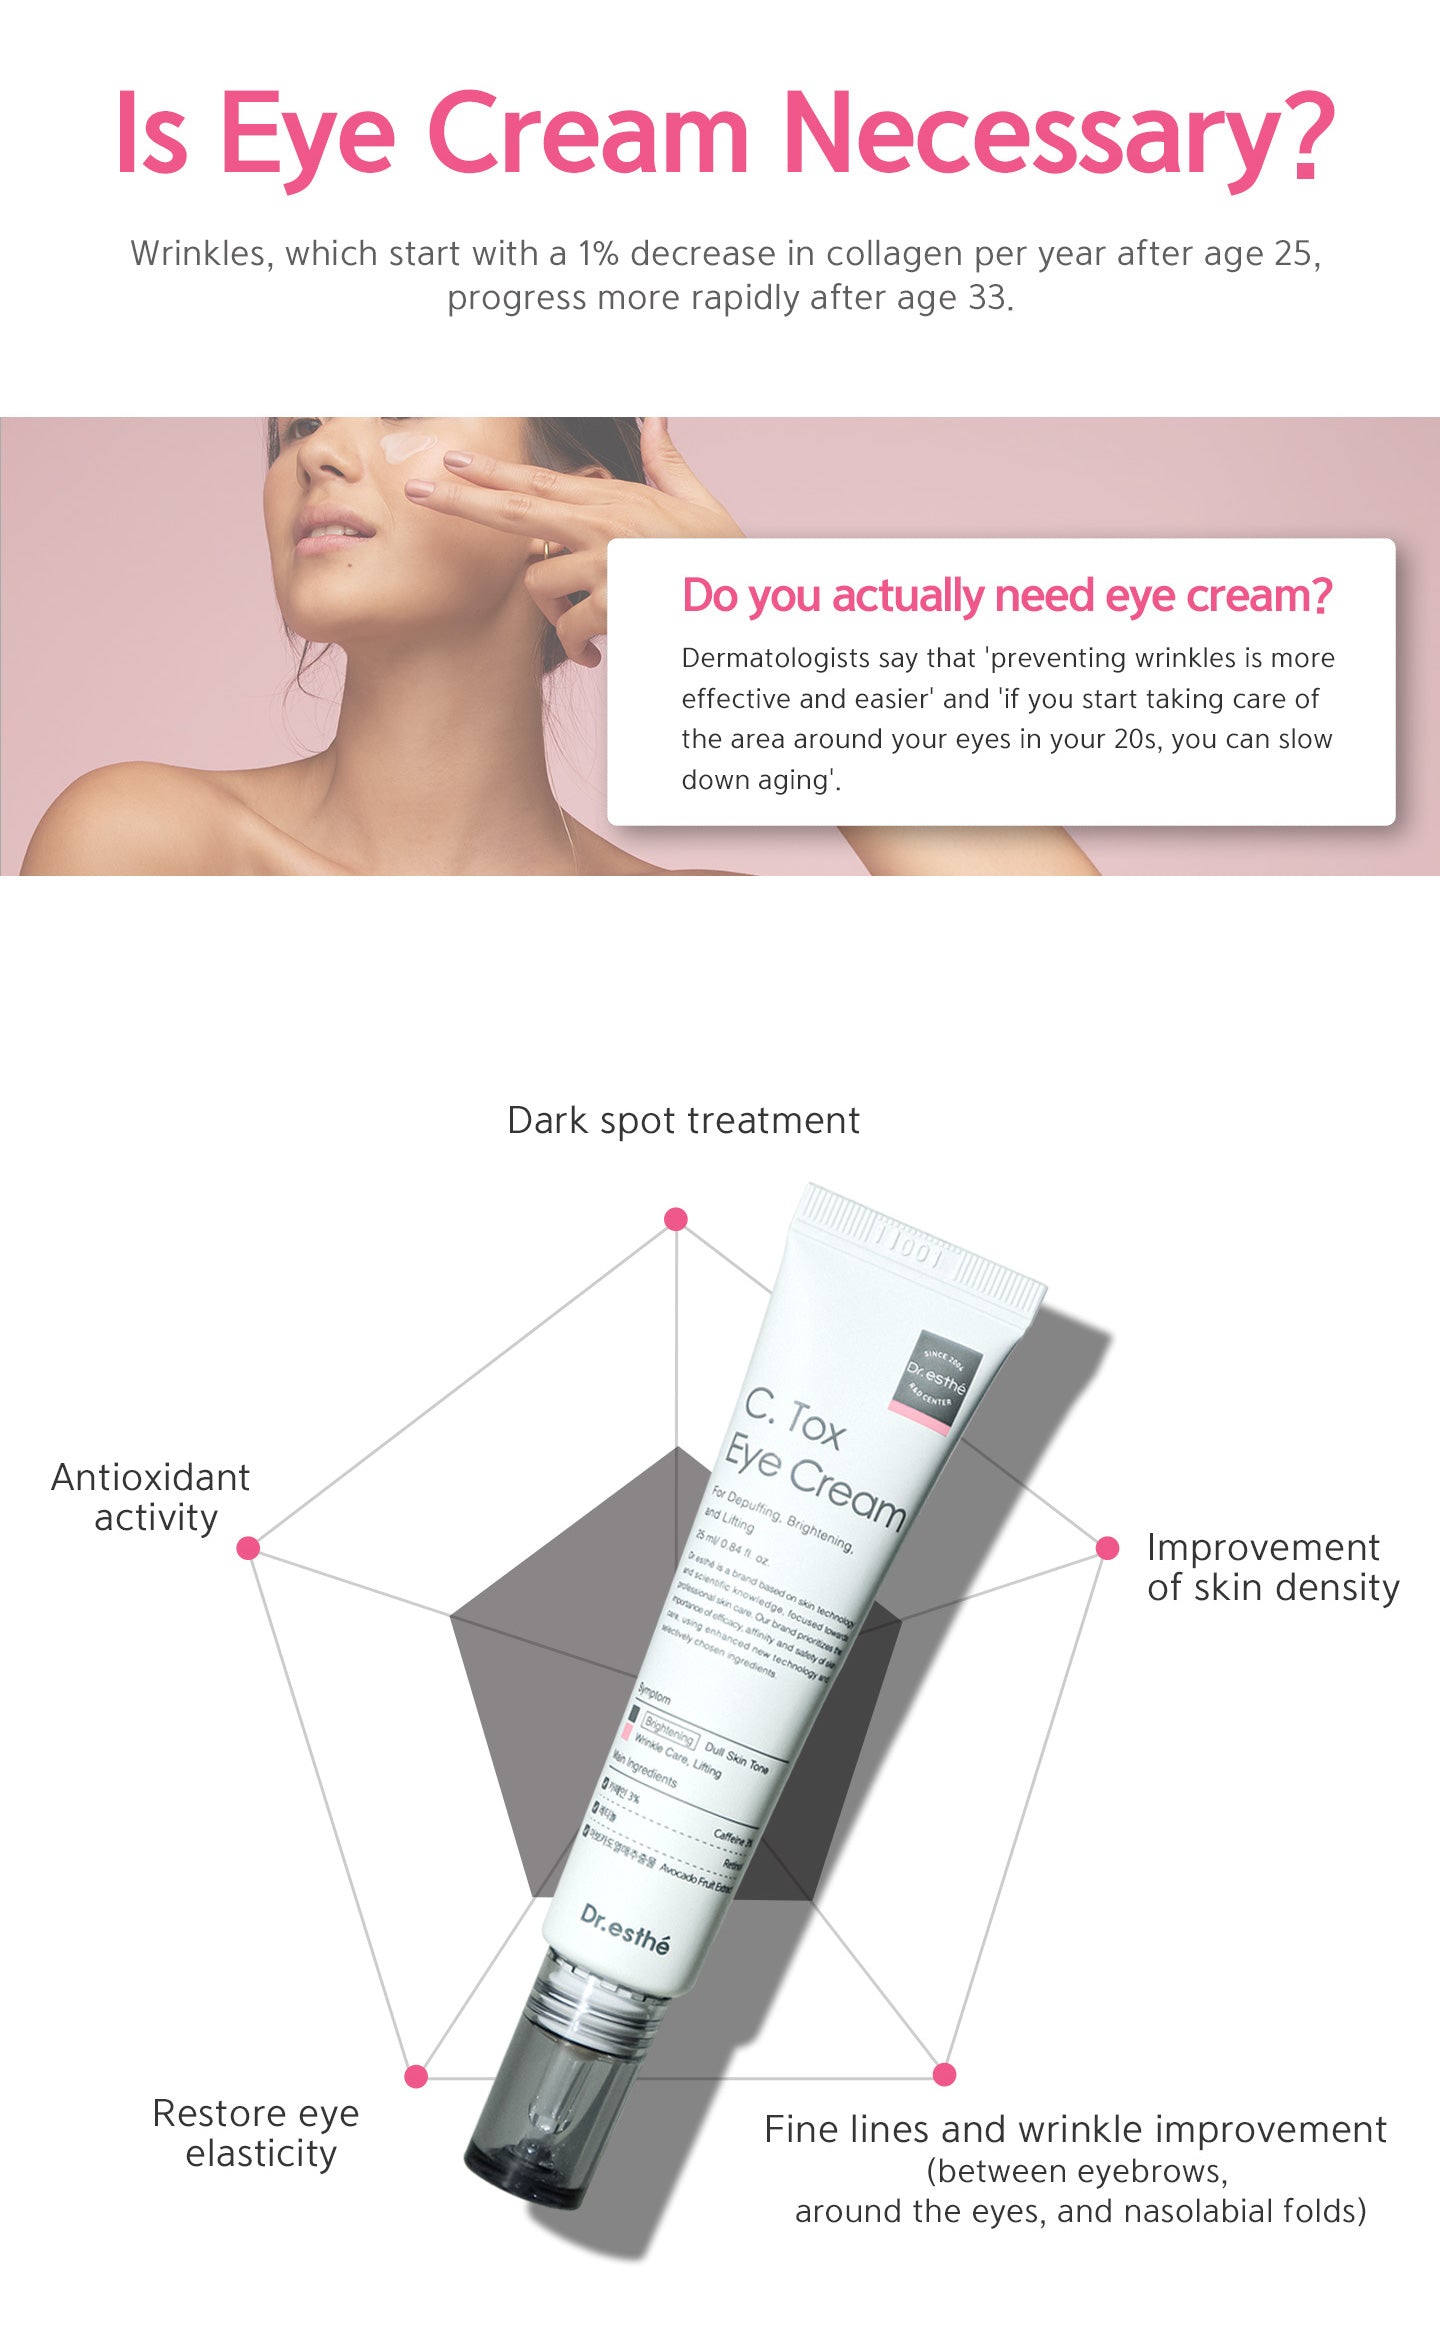 Is eye cream necessary? Wrinkles, which start with a 1% decrease in collagen per year after age 25, progress more rapidly after age 33. Dermatologists say that 'preventing wrinkles is more effective and easier'.